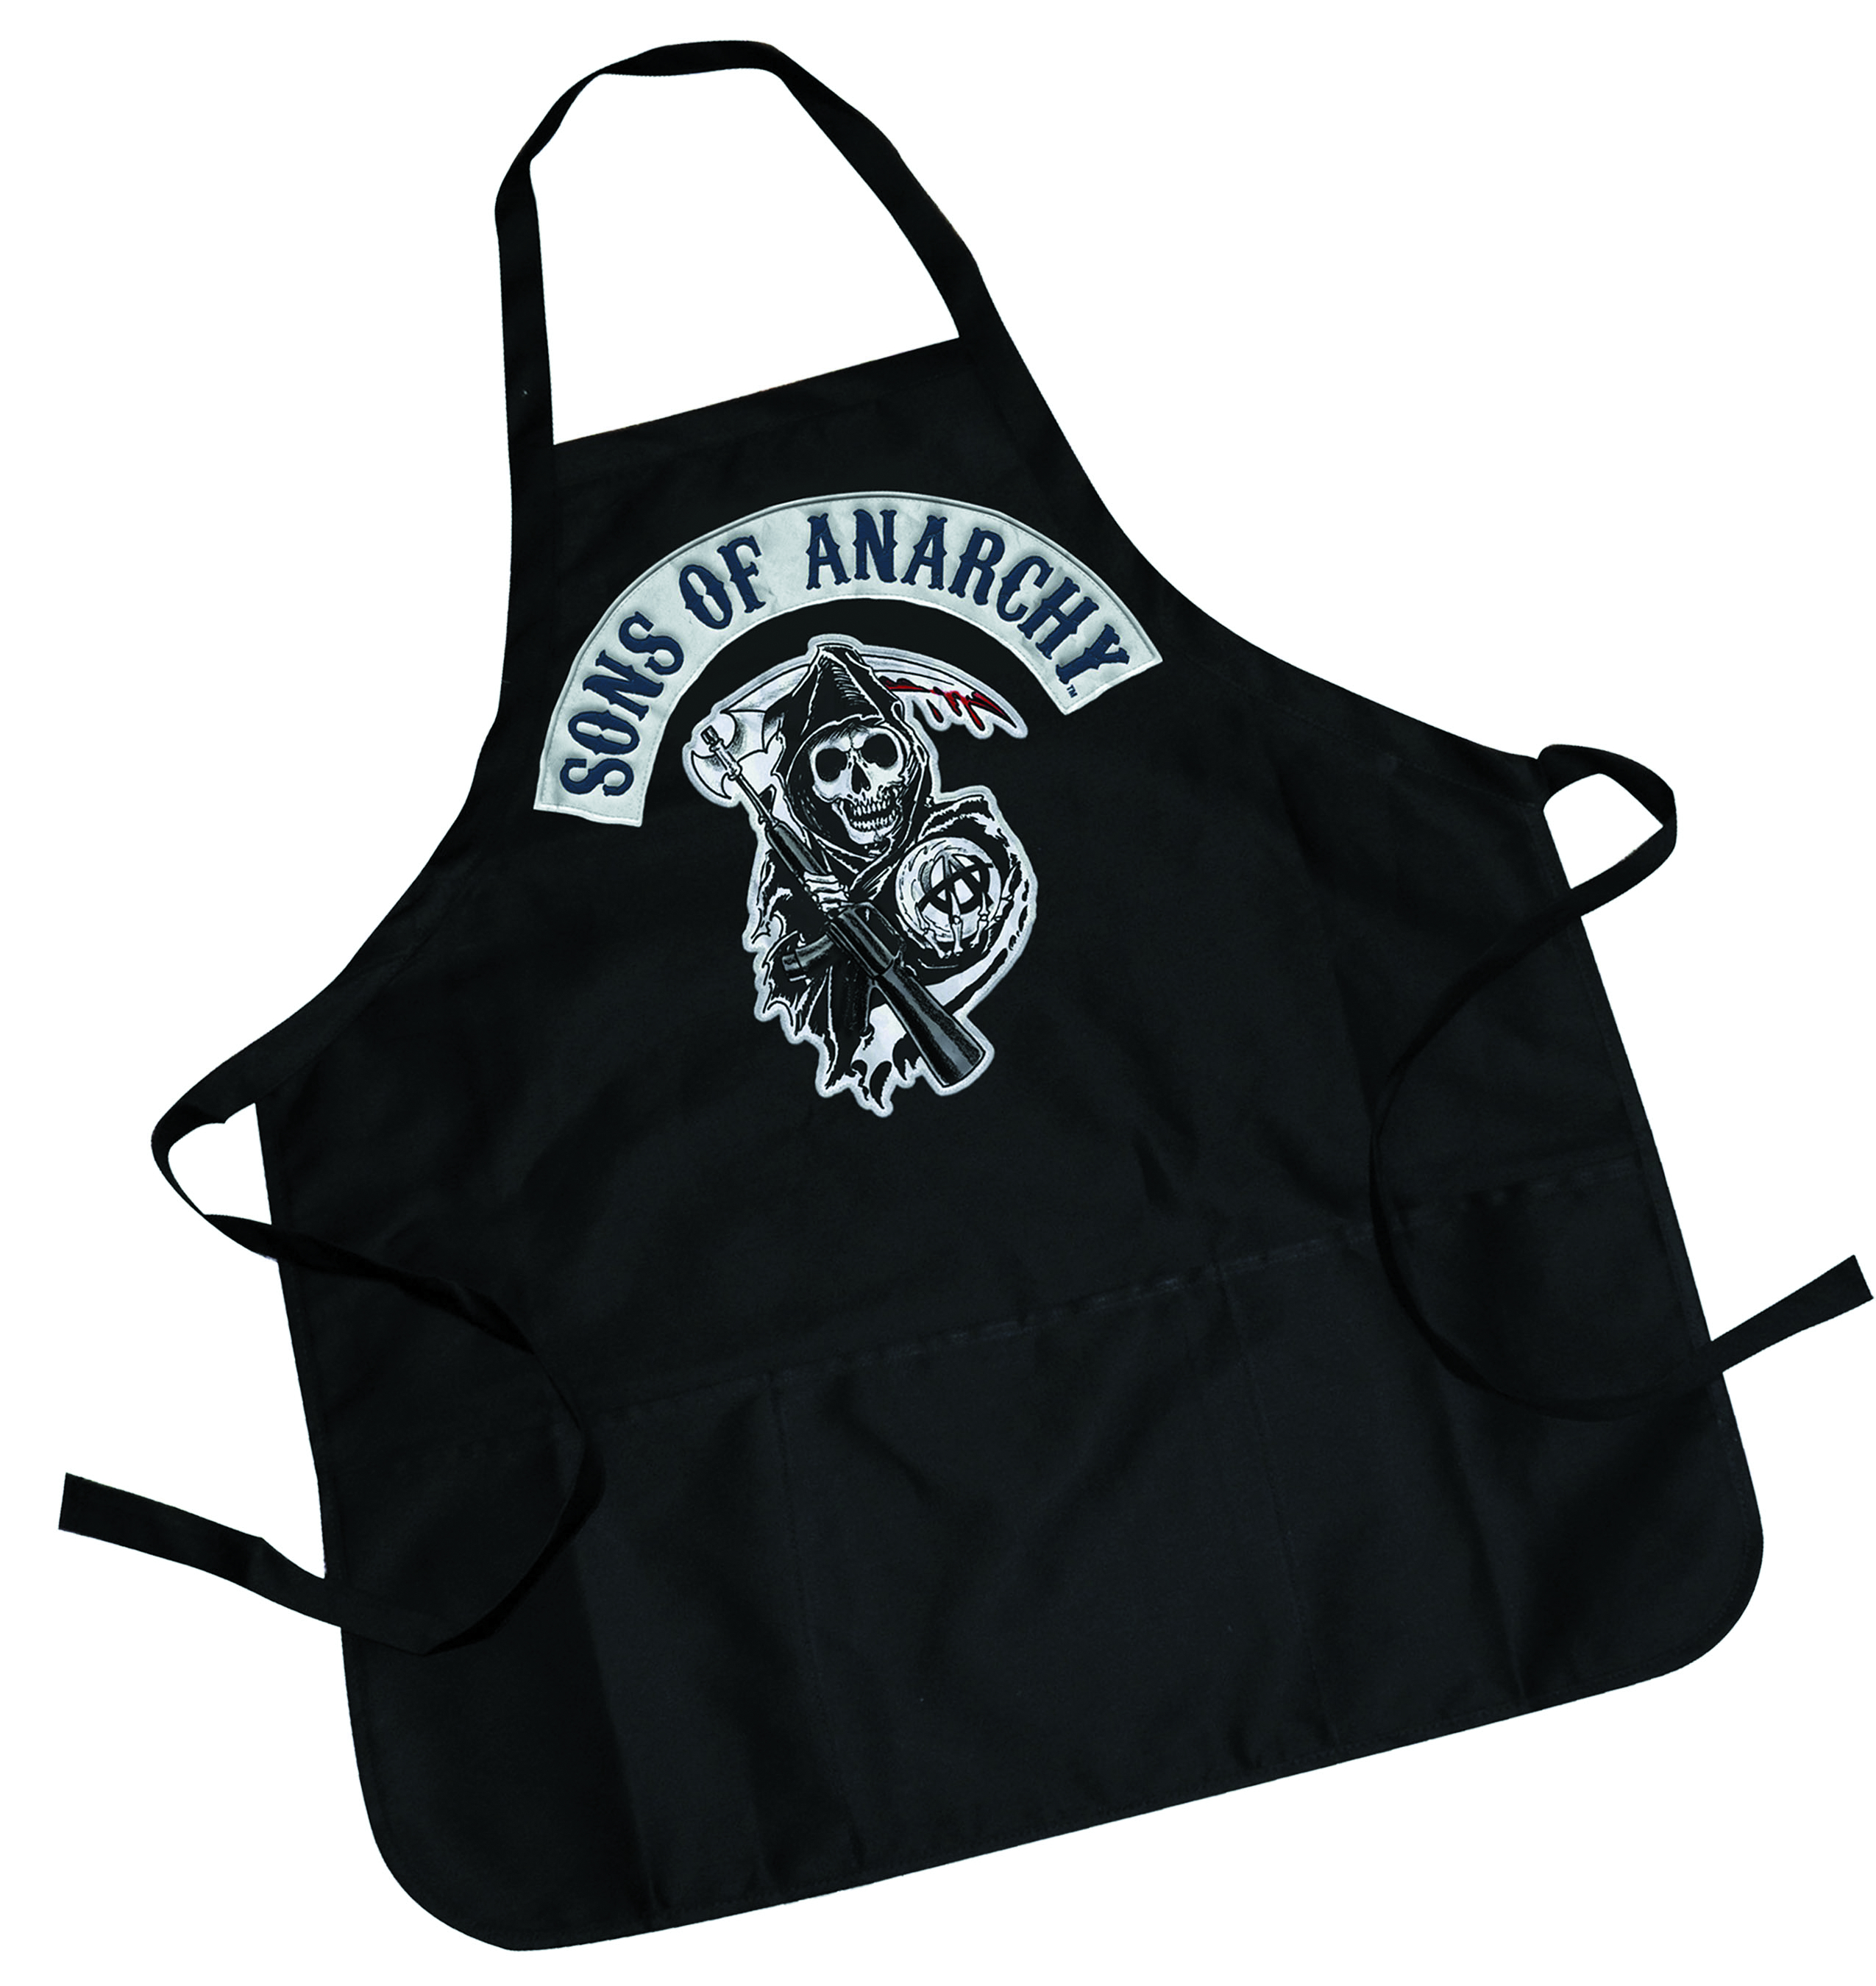 SEP142563 - SONS OF ANARCHY LOGO APRON - Previews World